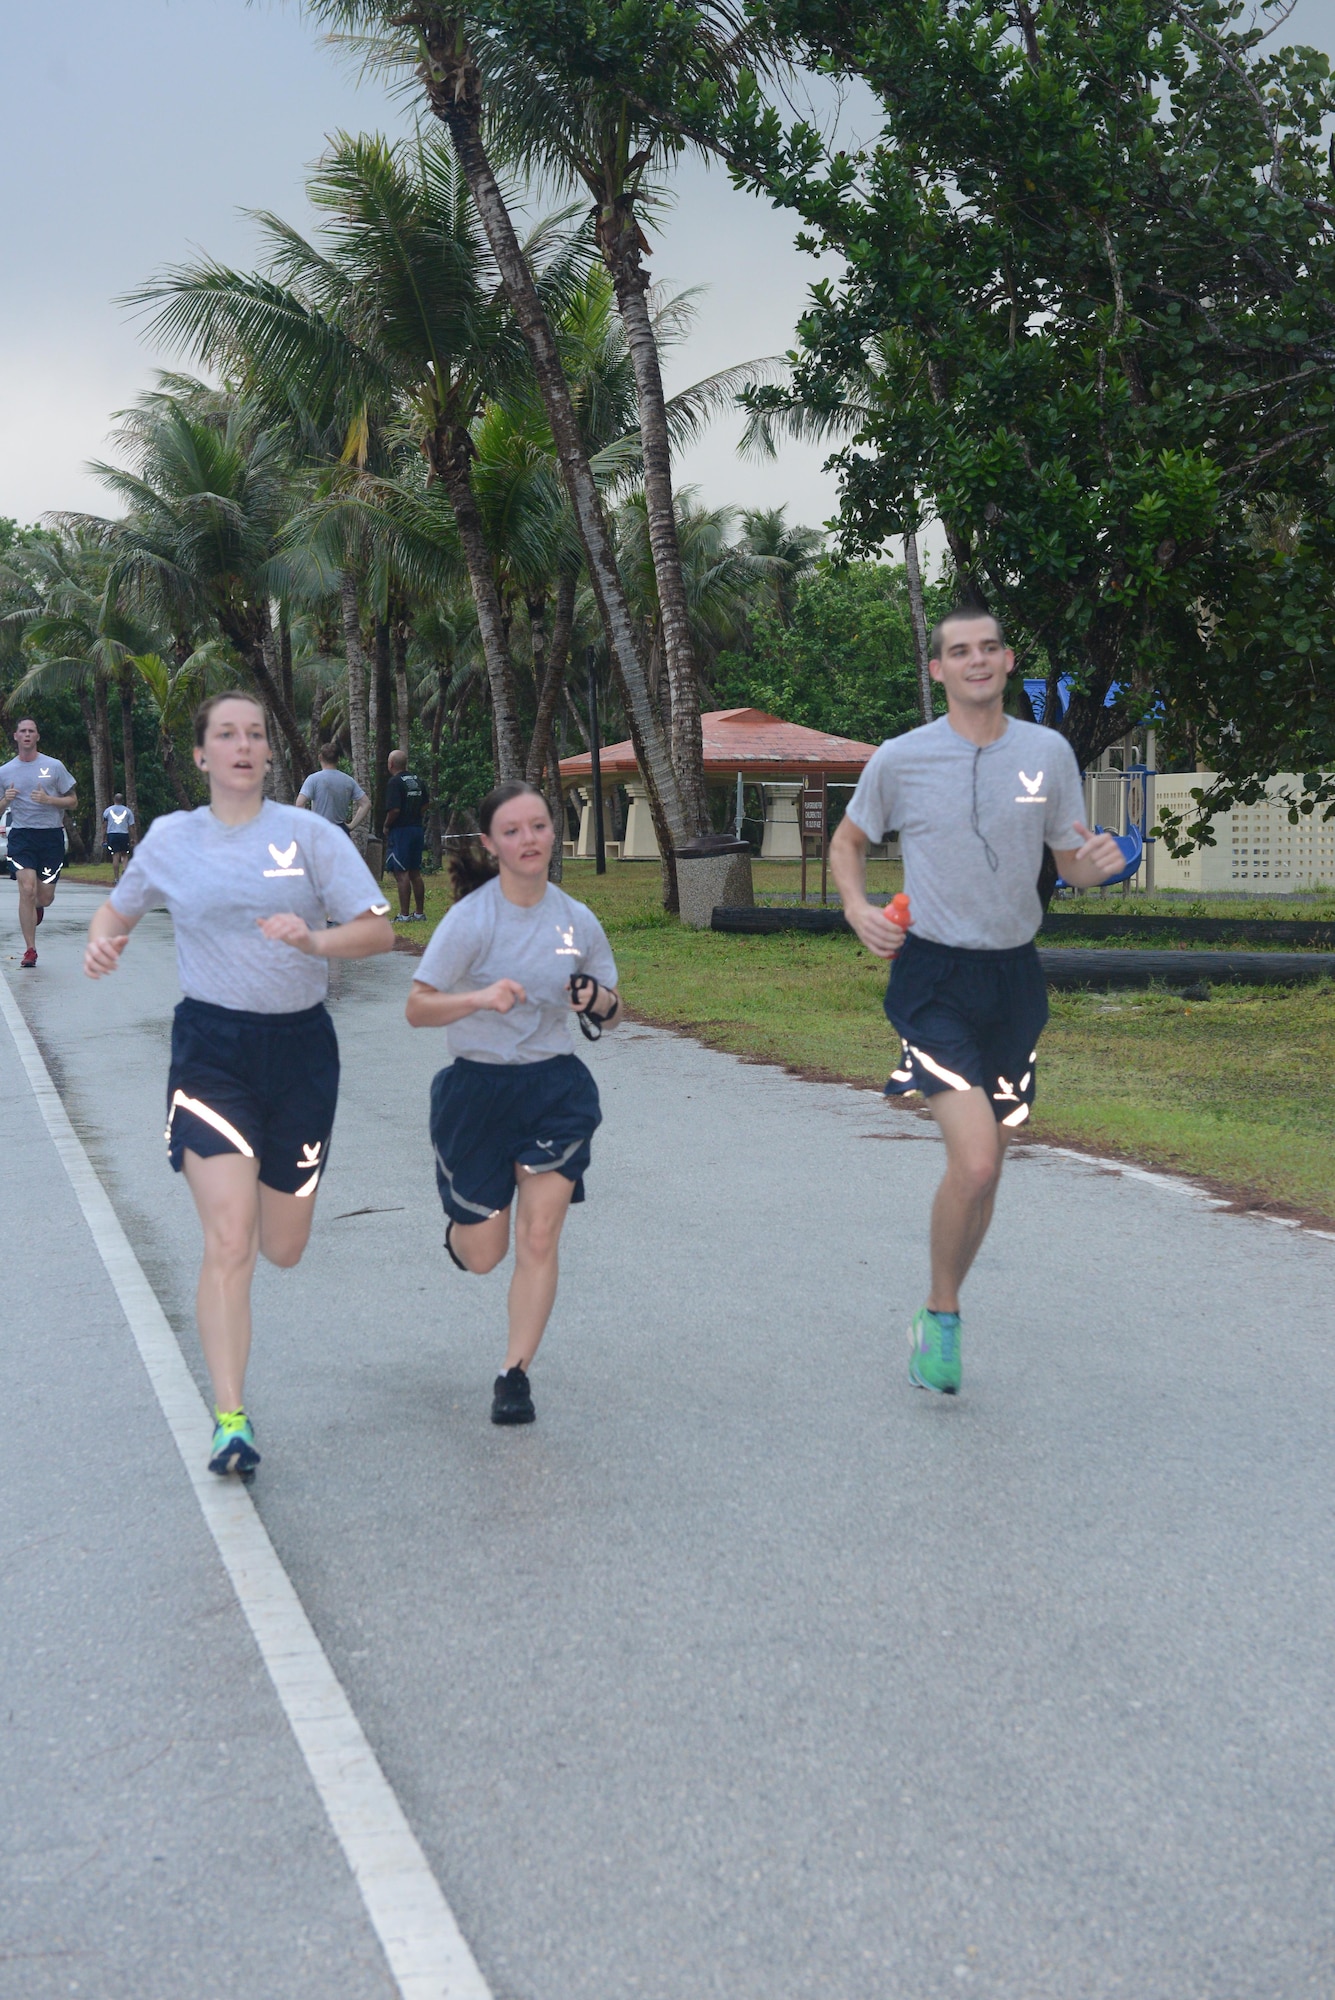 Airmen approach the finish line of the 6K memorial run Jan. 8, 2016, at Andersen Air Force Base, Guam. Service members ran six kilometers to represent the six Airmen who were killed Dec. 21, 2015, while conducting counter-threat operations outside of Bagram Air Base, Afghanistan. (U.S. Air Force photo/Airman 1st Class Arielle Vasquez)